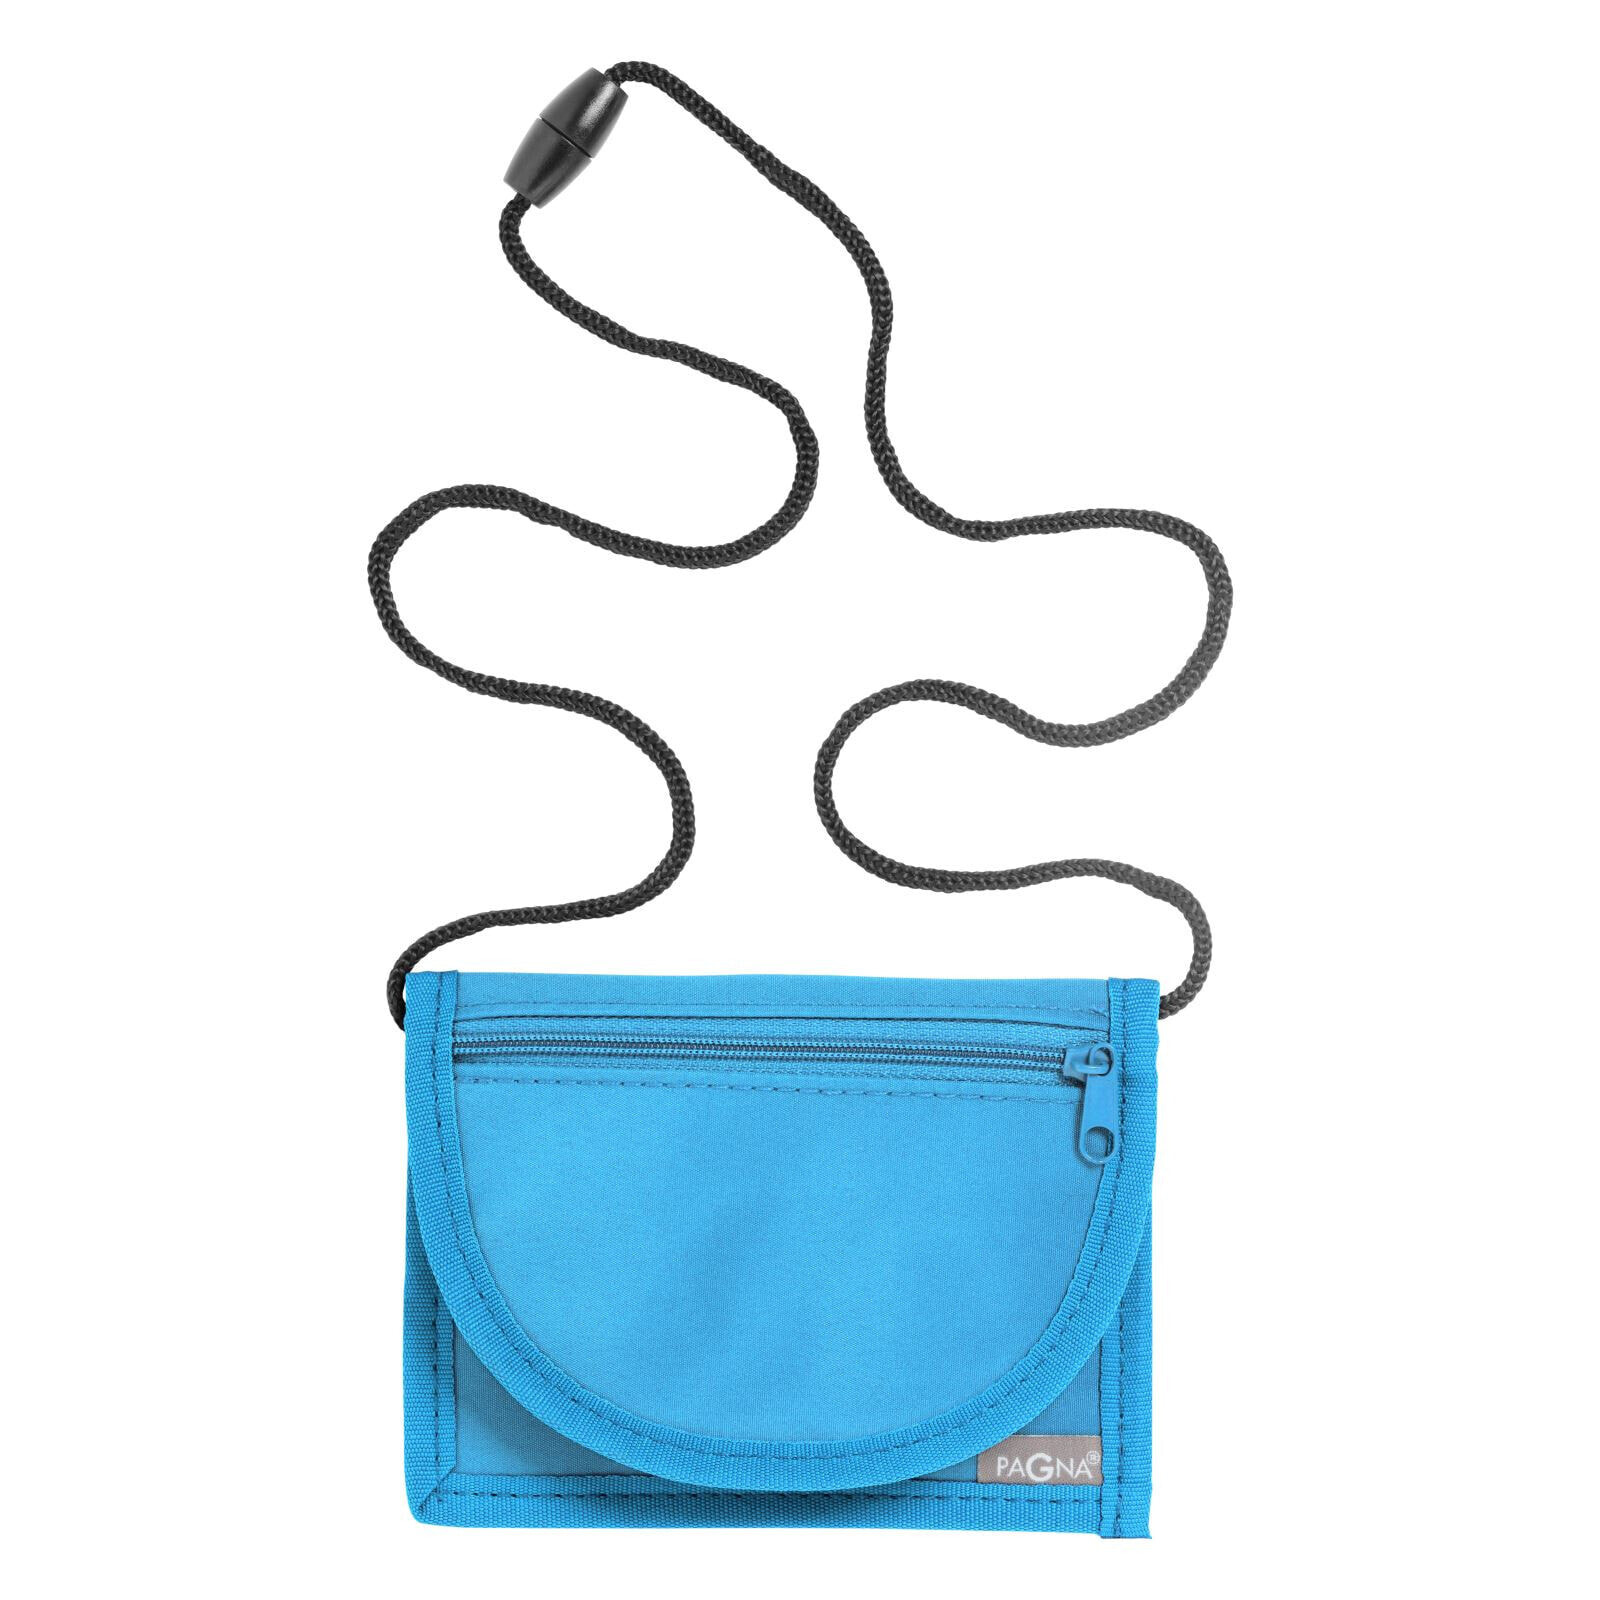 Pagna 99507-20 - Neck pouch - Blue - Nylon - Monochromatic - Neck strap - Hook-and-loop closure